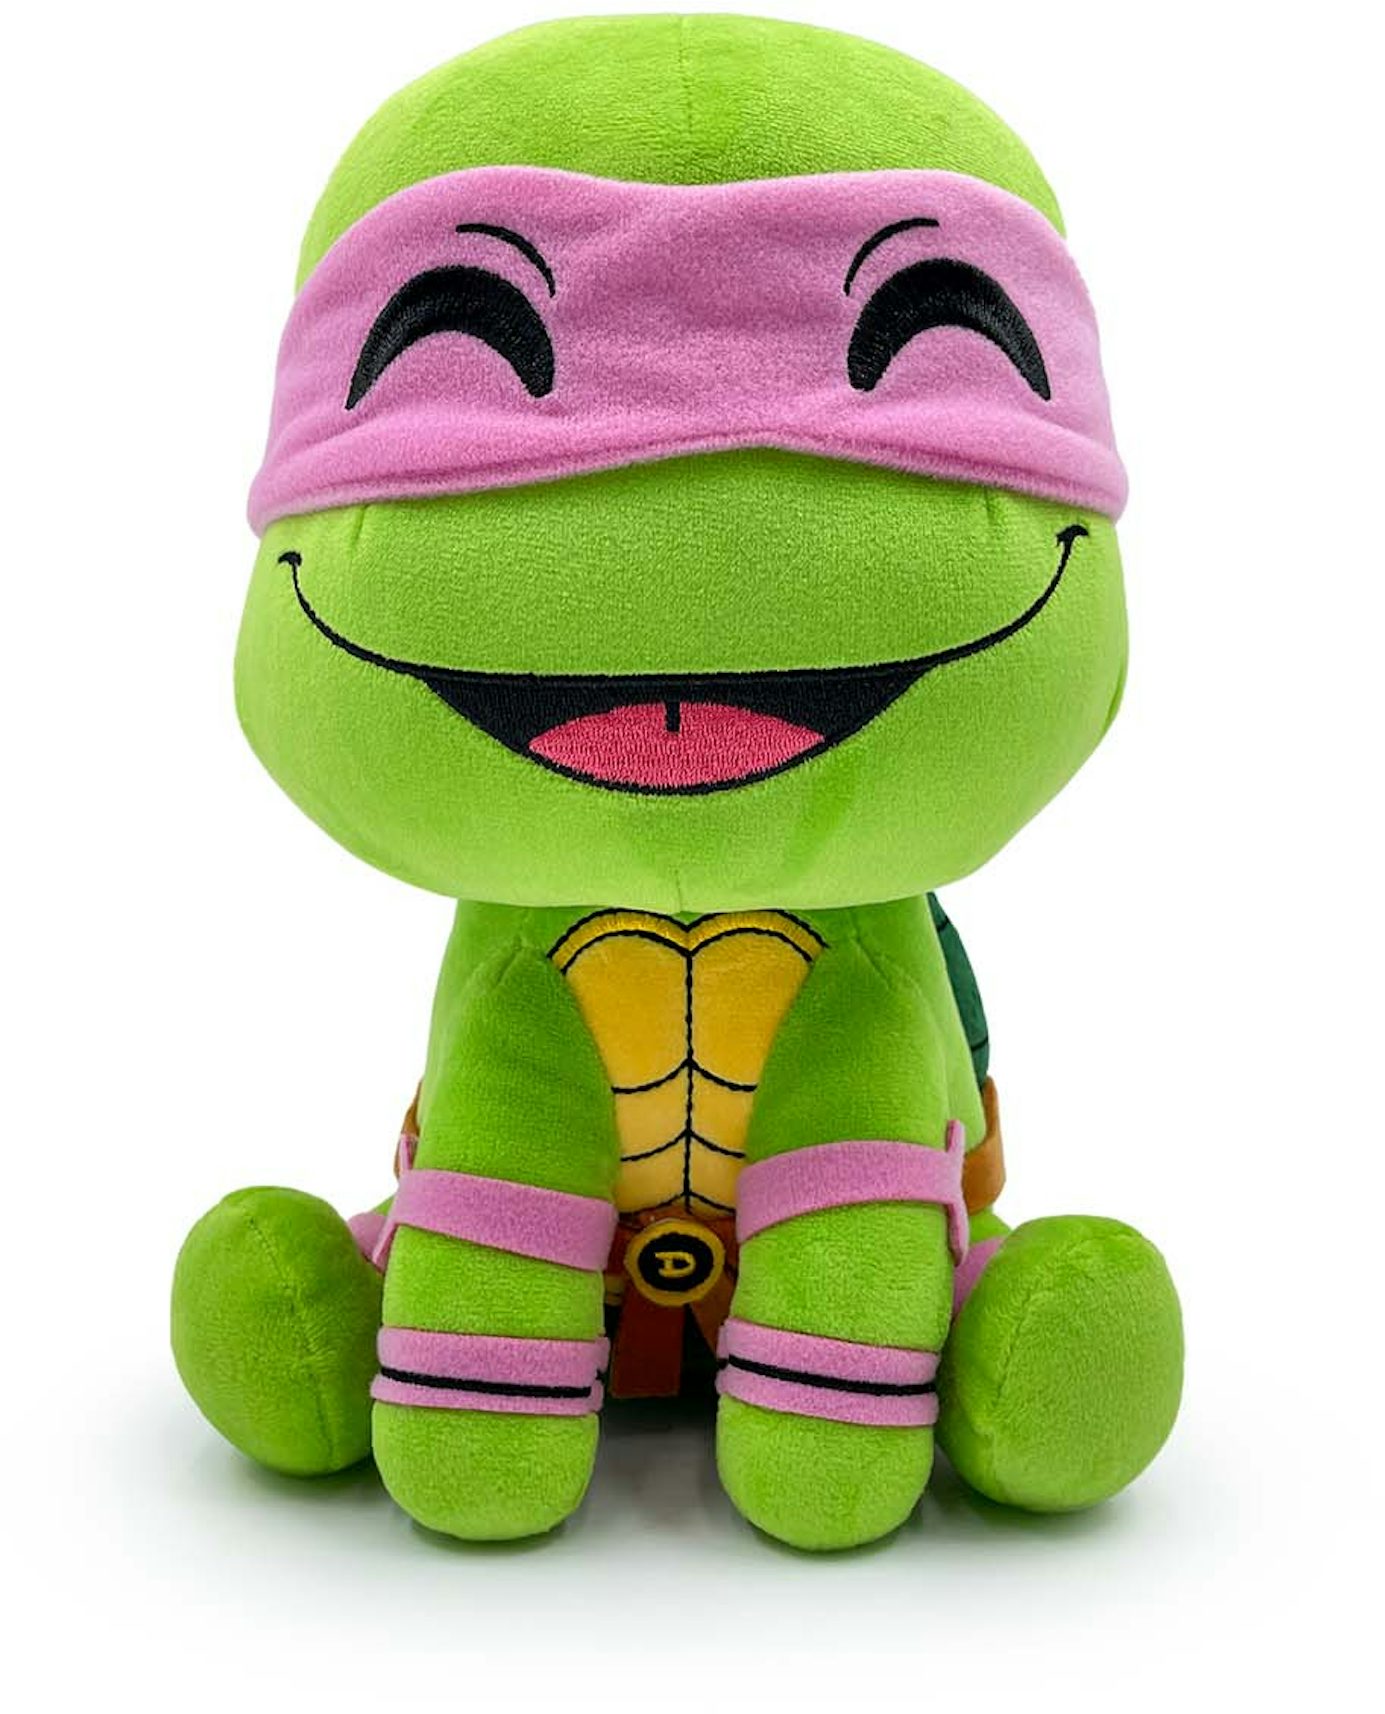 Big Floppa Plush (9in) – Youtooz Collectibles